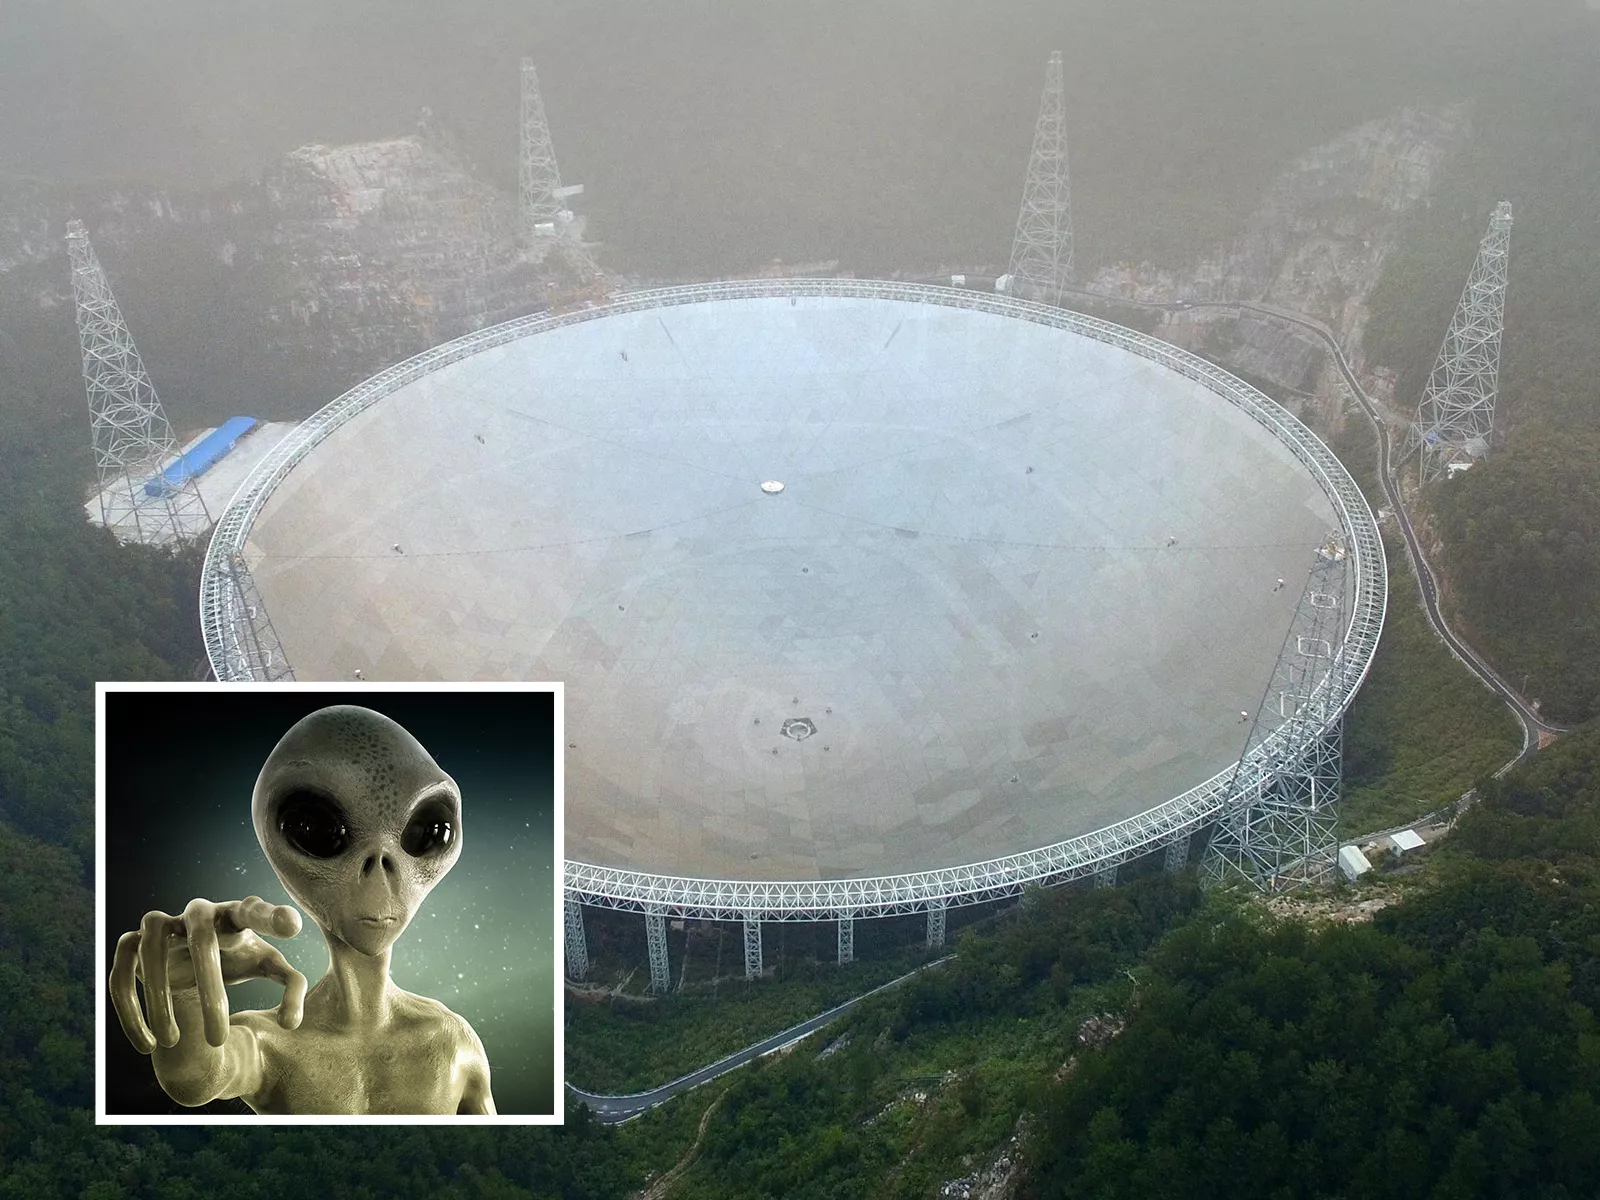 China says signal from advanced alien civilization might have been detected